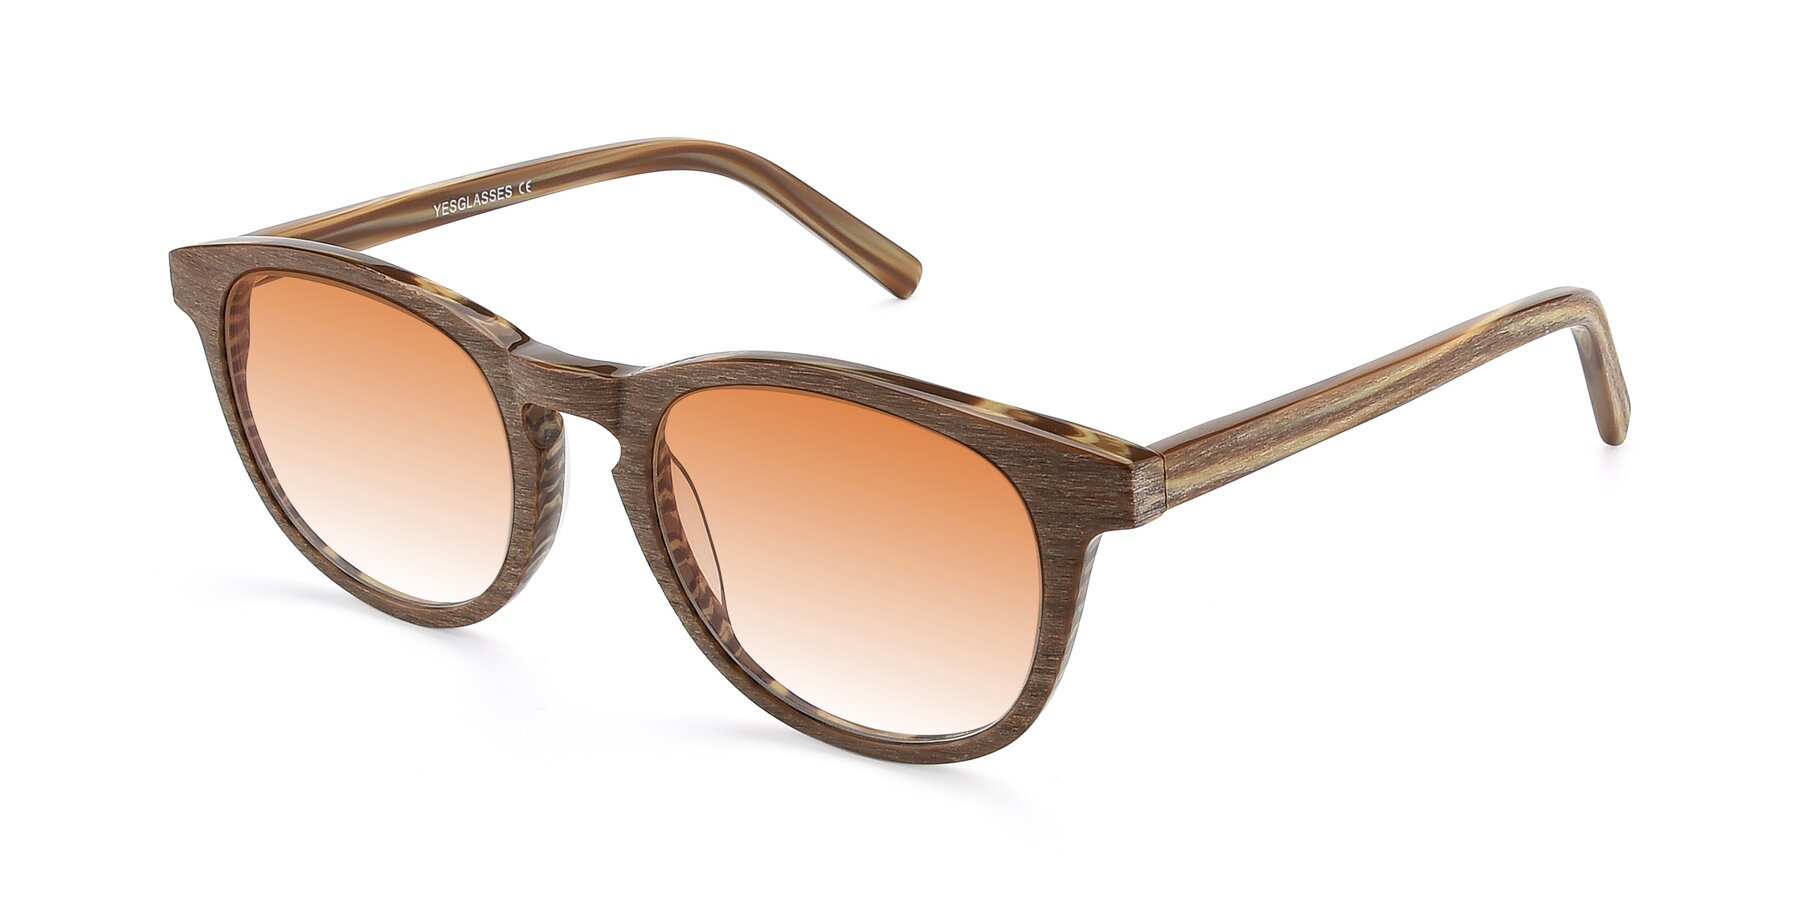 Angle of SR6044 in Brown-Wooden with Orange Gradient Lenses